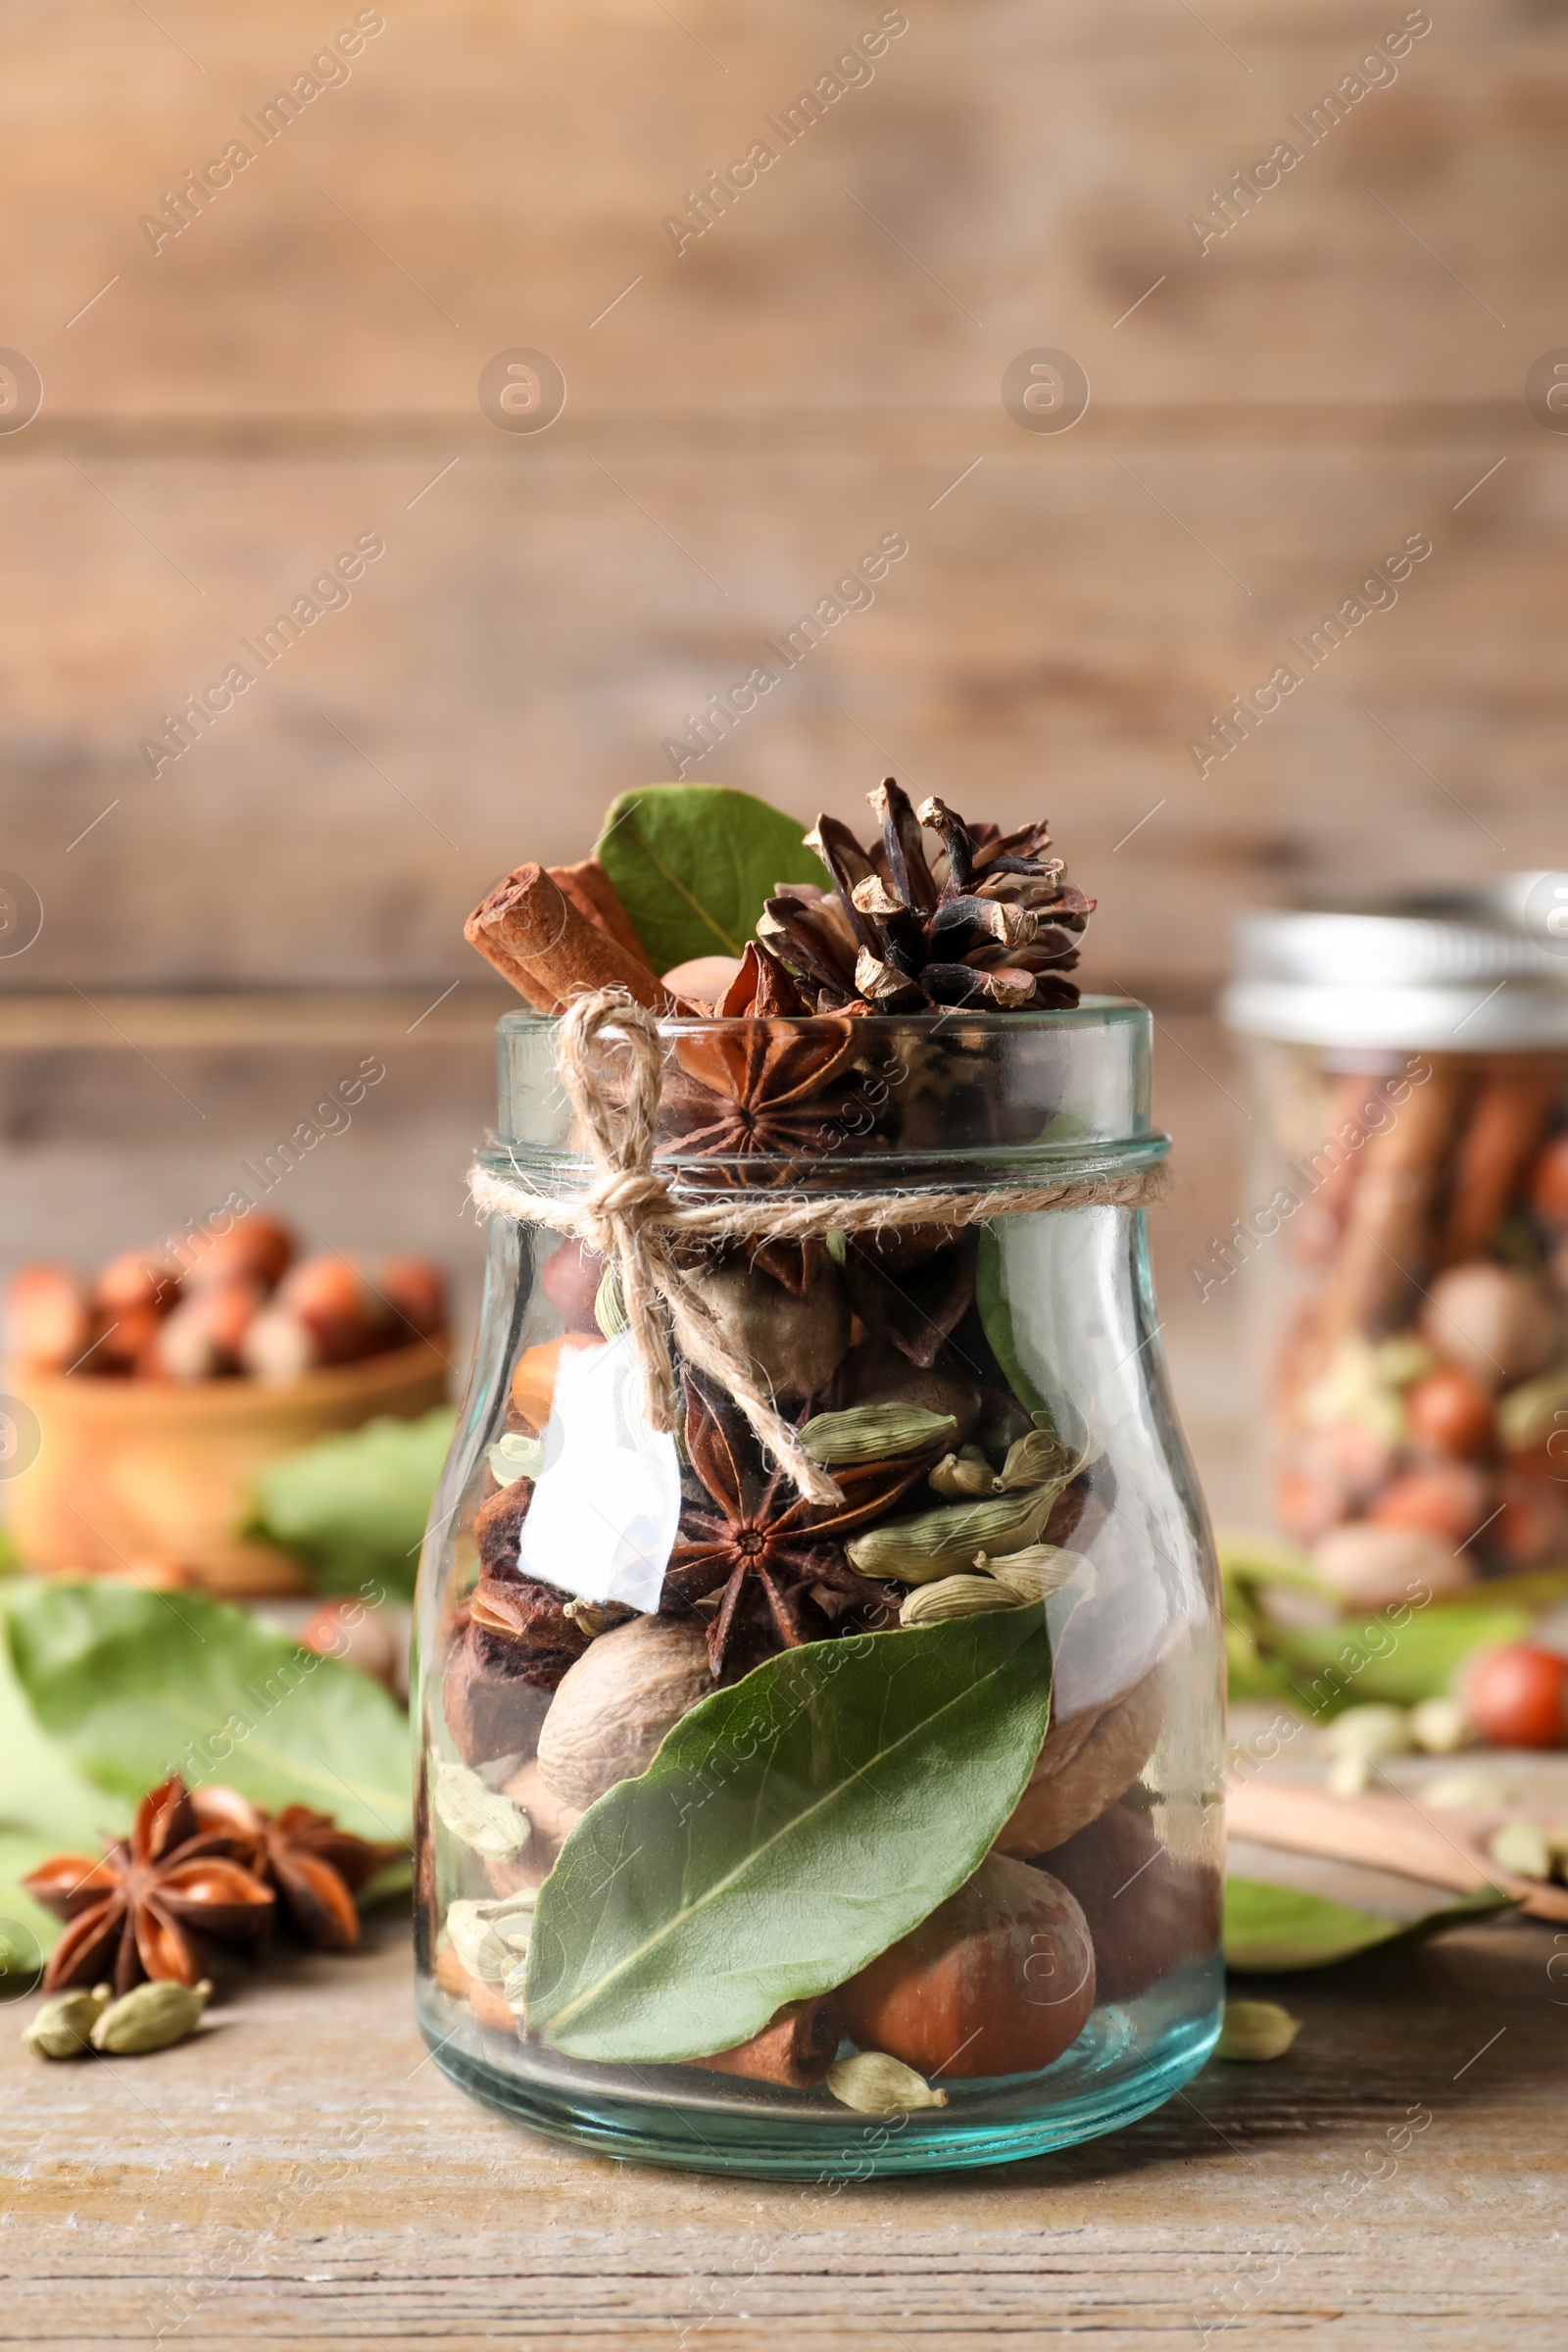 Photo of Aromatic potpourri in glass jar on wooden table